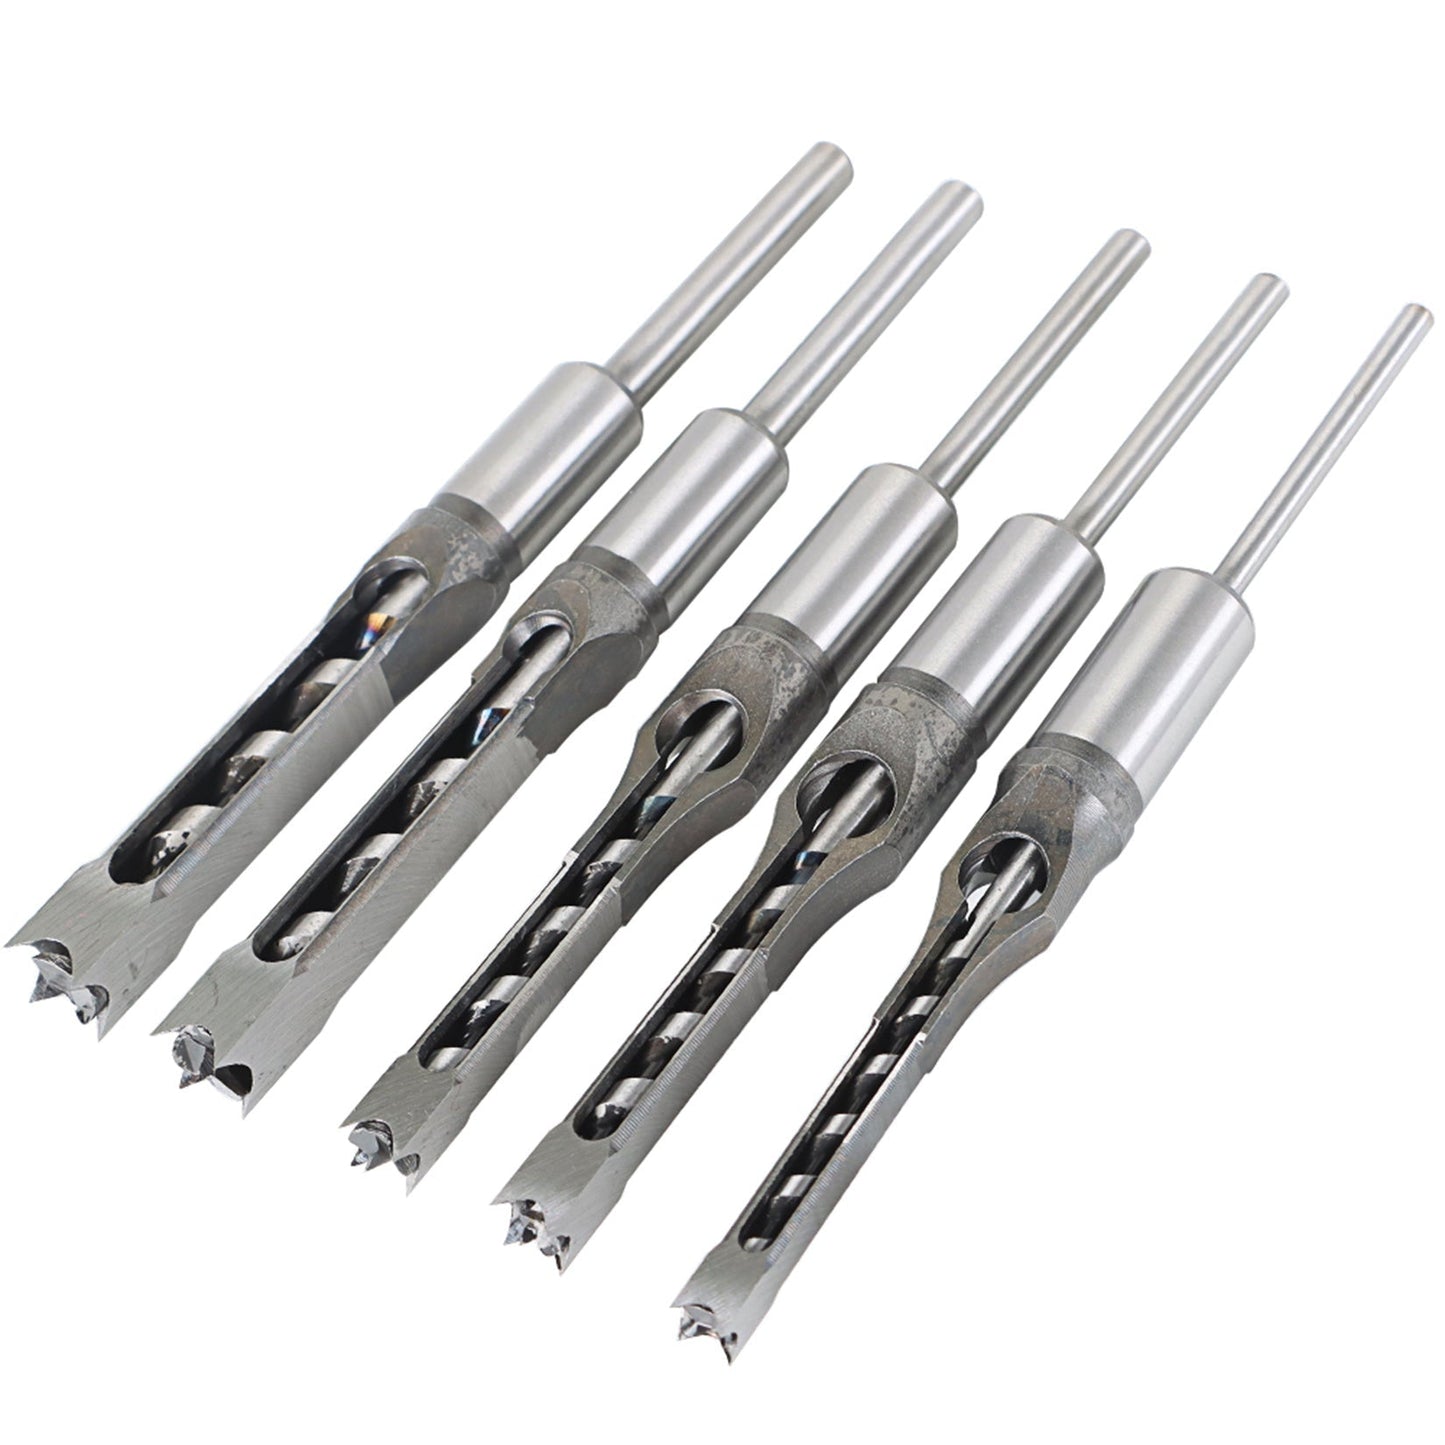 findmall  7Pcs Square Hole Drill Bit HSS Square Hole Saw Mortise Chisel Drill Bit Tools Wood Mortising Chisel Set Twist Drill Wood Hole Drilling Tool for Mortising Machines Drill Press Attachments FINDMALLPARTS